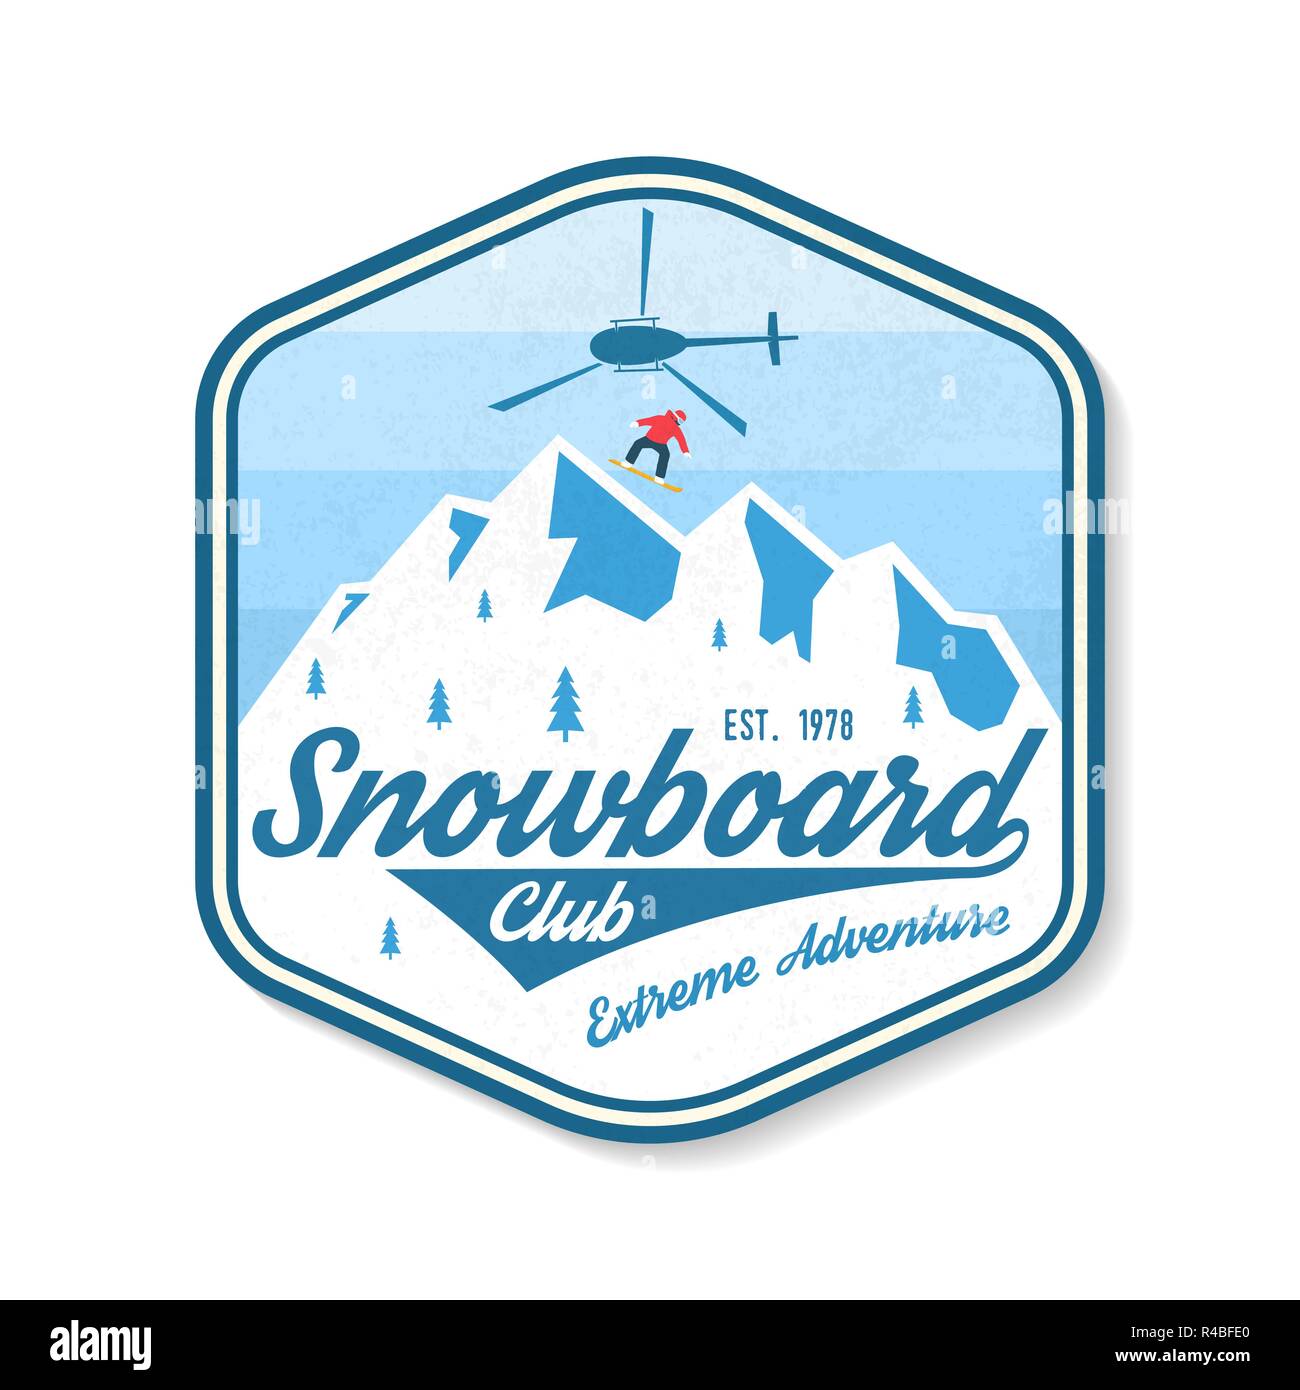 Snowboard Club patch. Vector illustration. Concept for shirt, print, stamp, badge, patch or tee. Vintage typography design with snowboard, helicopter and mountain silhouette. Extreme sport. Stock Vector